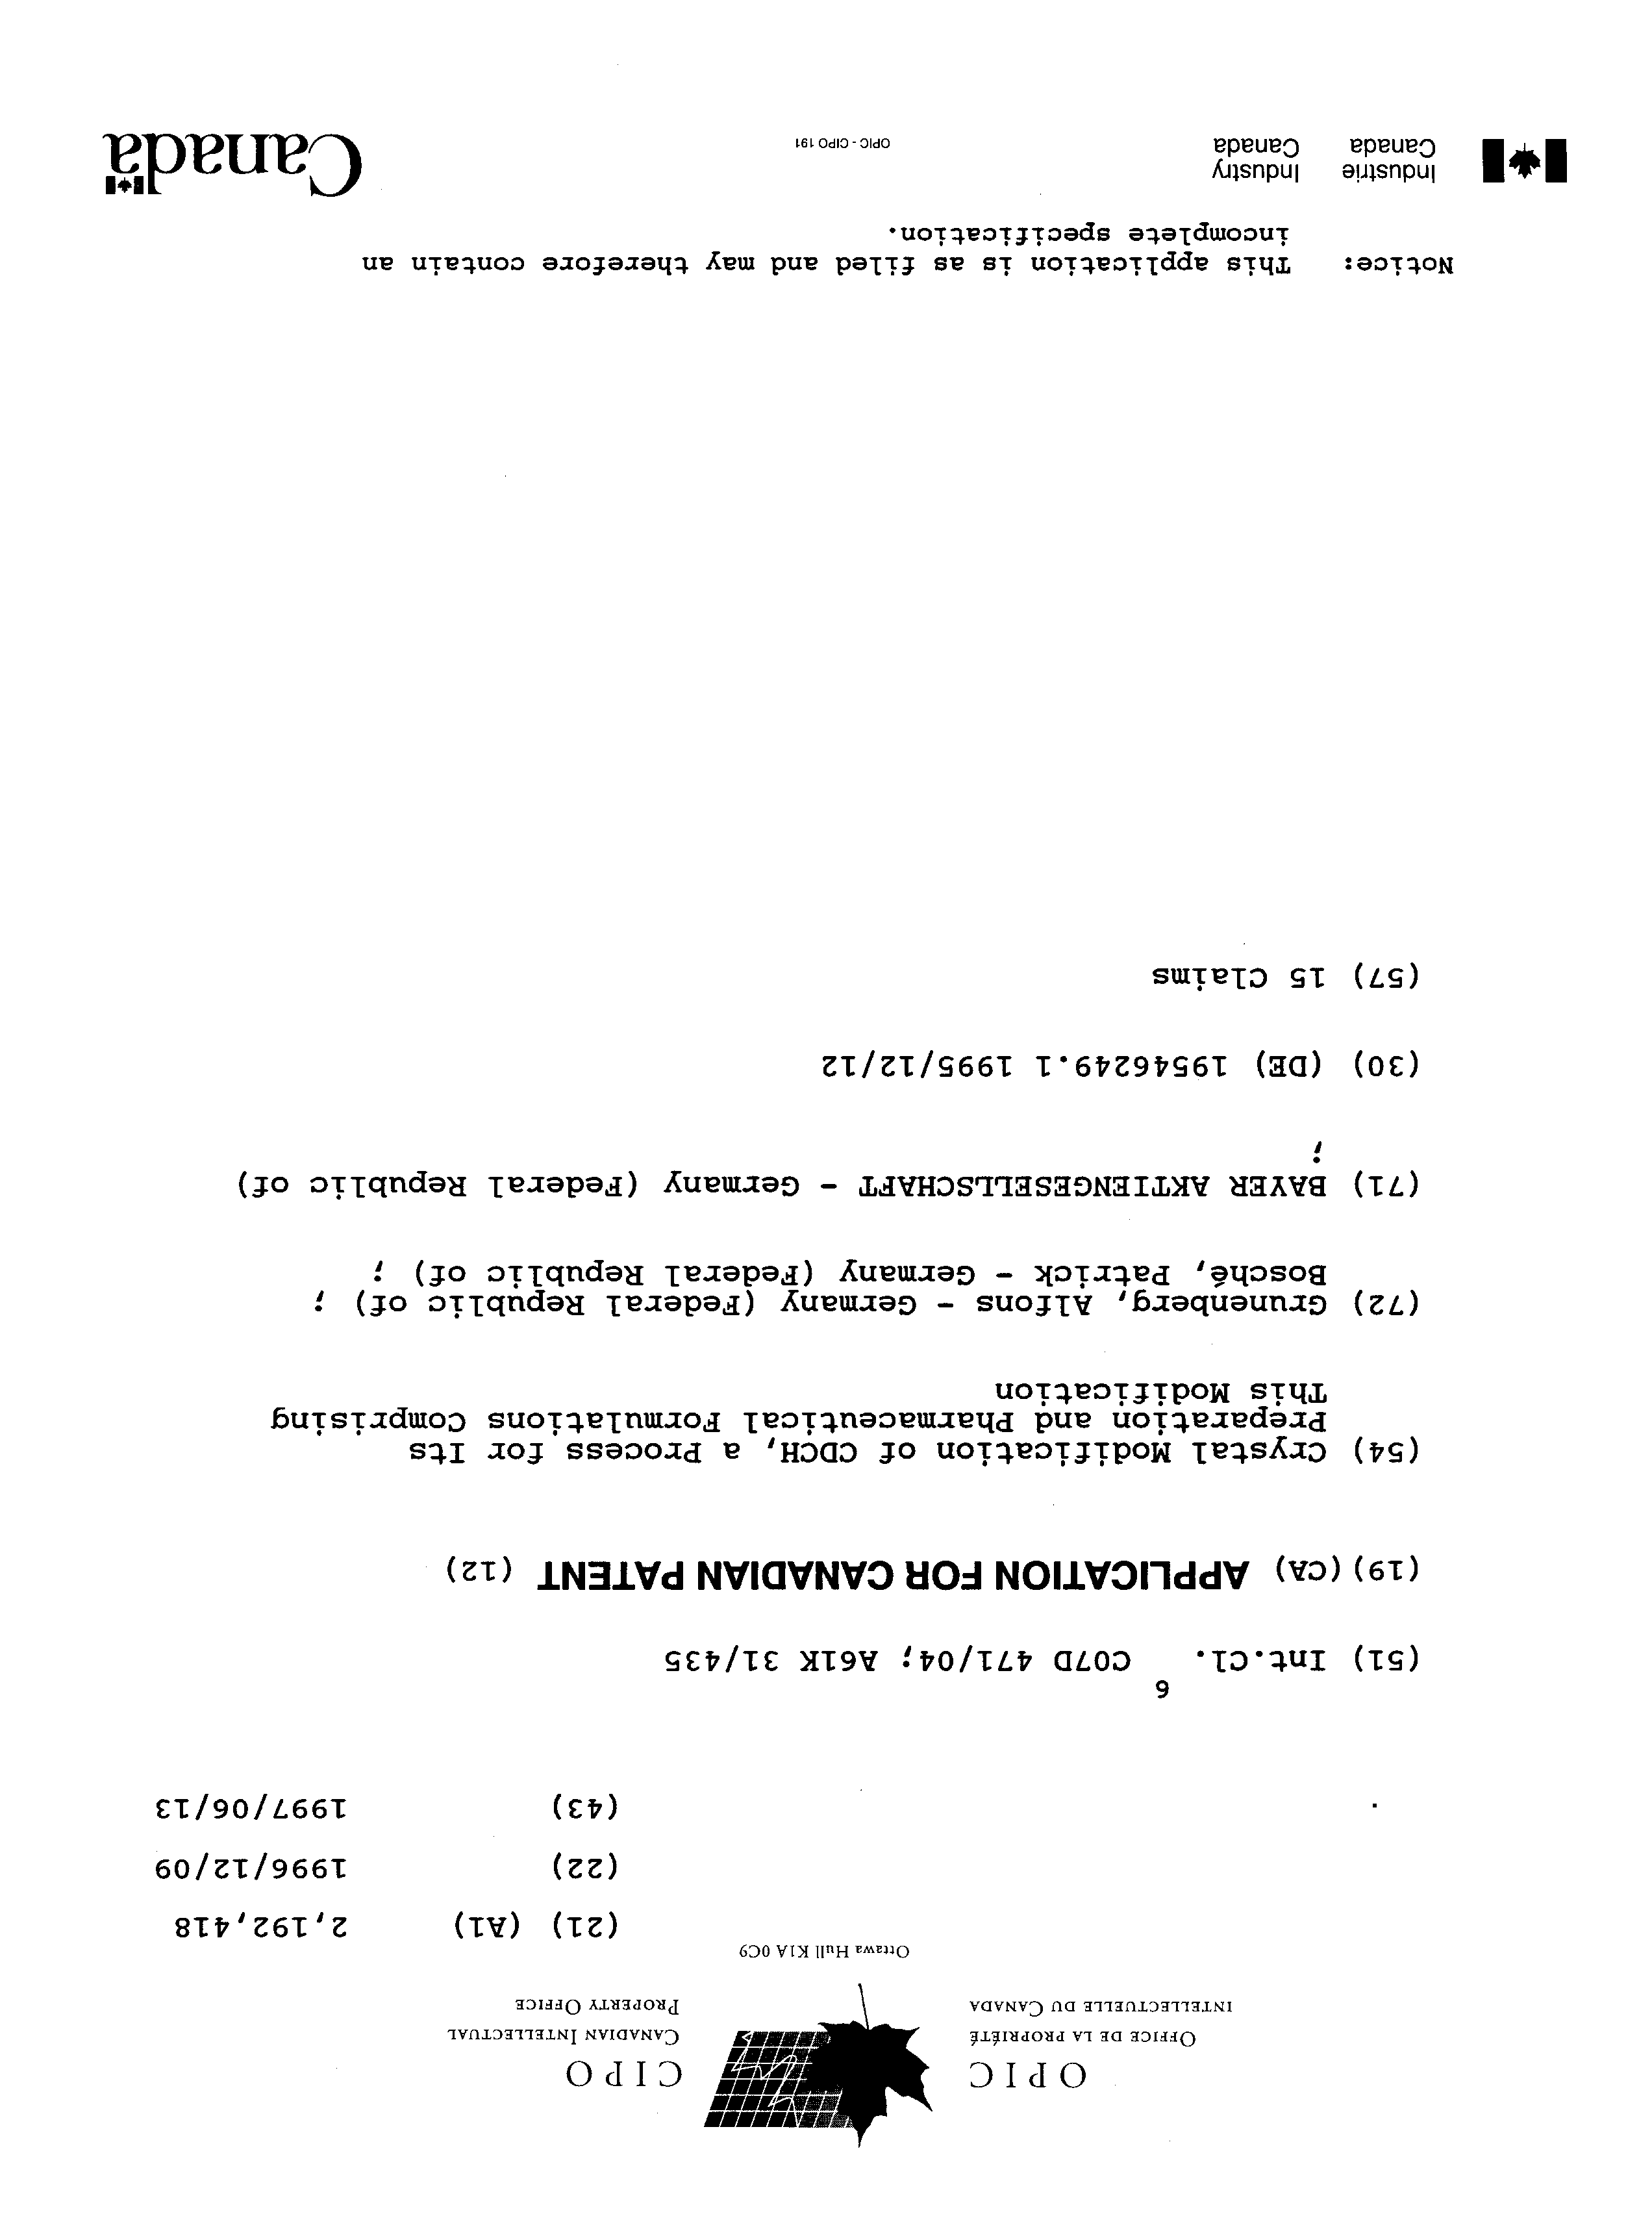 Canadian Patent Document 2192418. Cover Page 19961217. Image 1 of 1